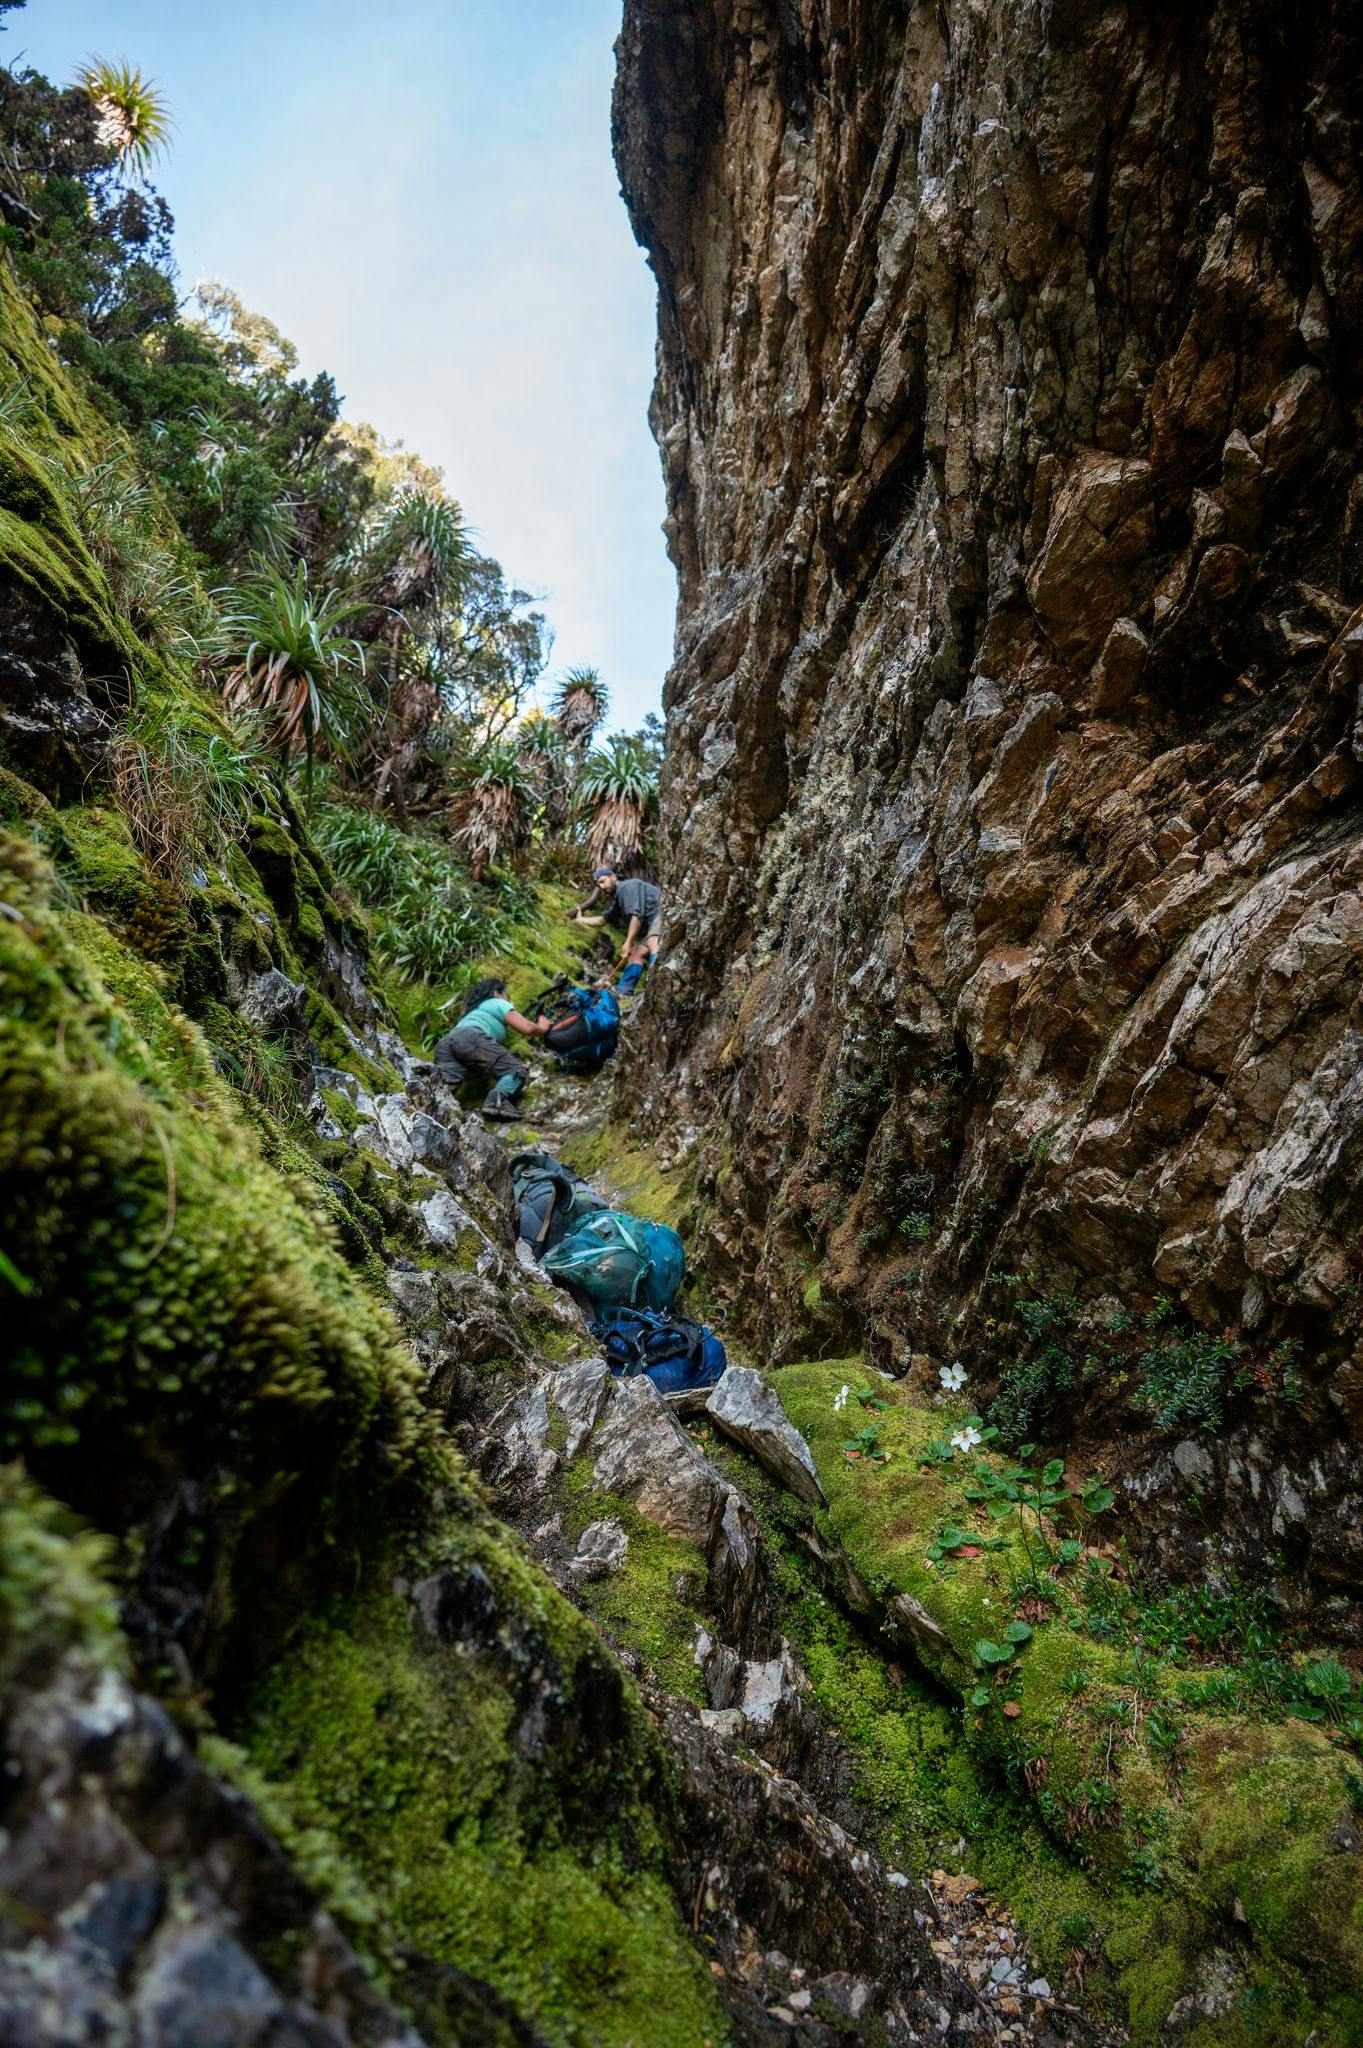 Slowly descending the Tilted Chasm by passing packs. Some opted to keep their packs on when descending. Photo Credit - Craig Pearce